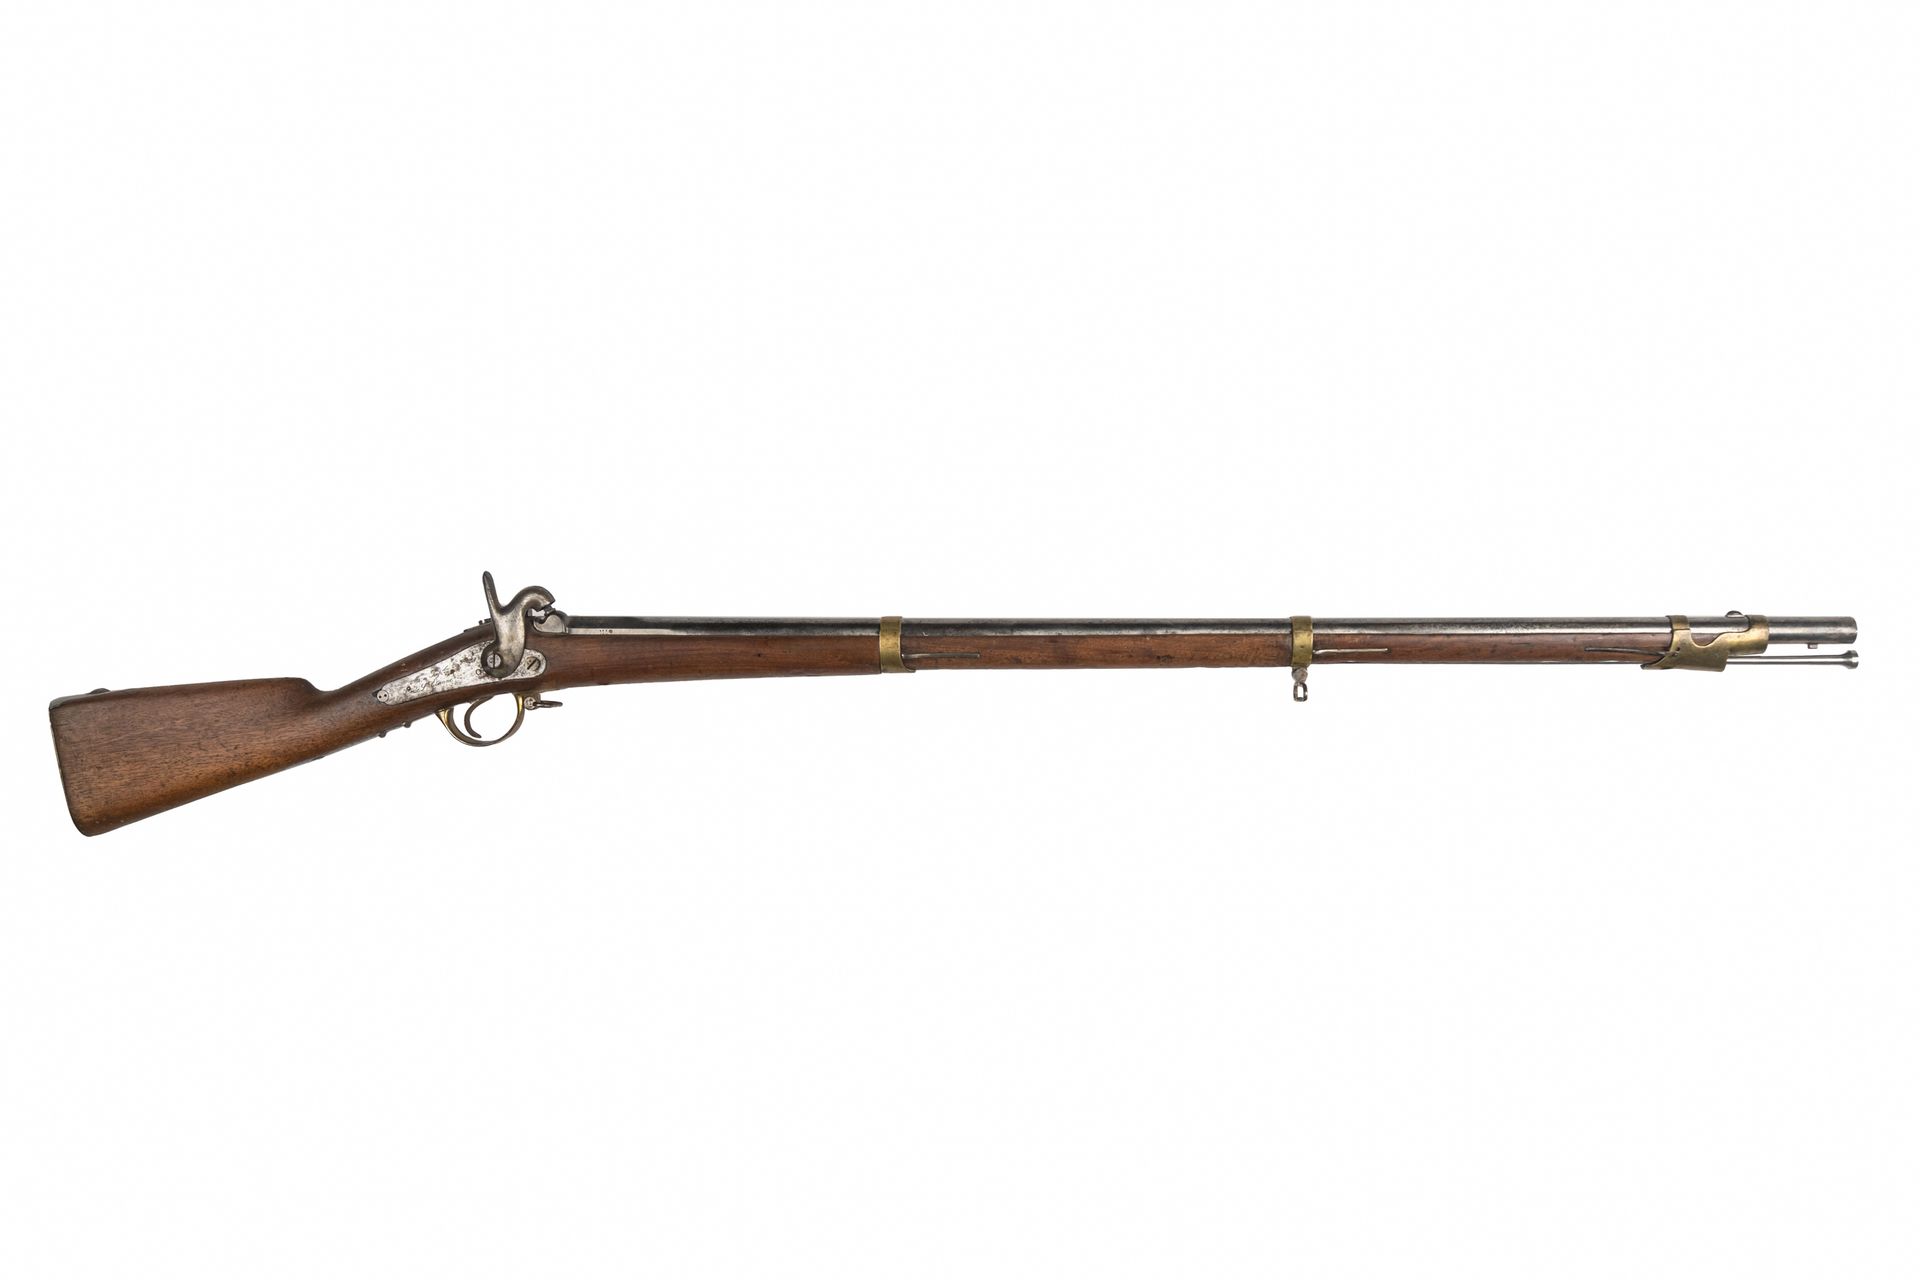 Null Percussion rifle model 1857 of navy. 

Round barrel with sides with the thu&hellip;